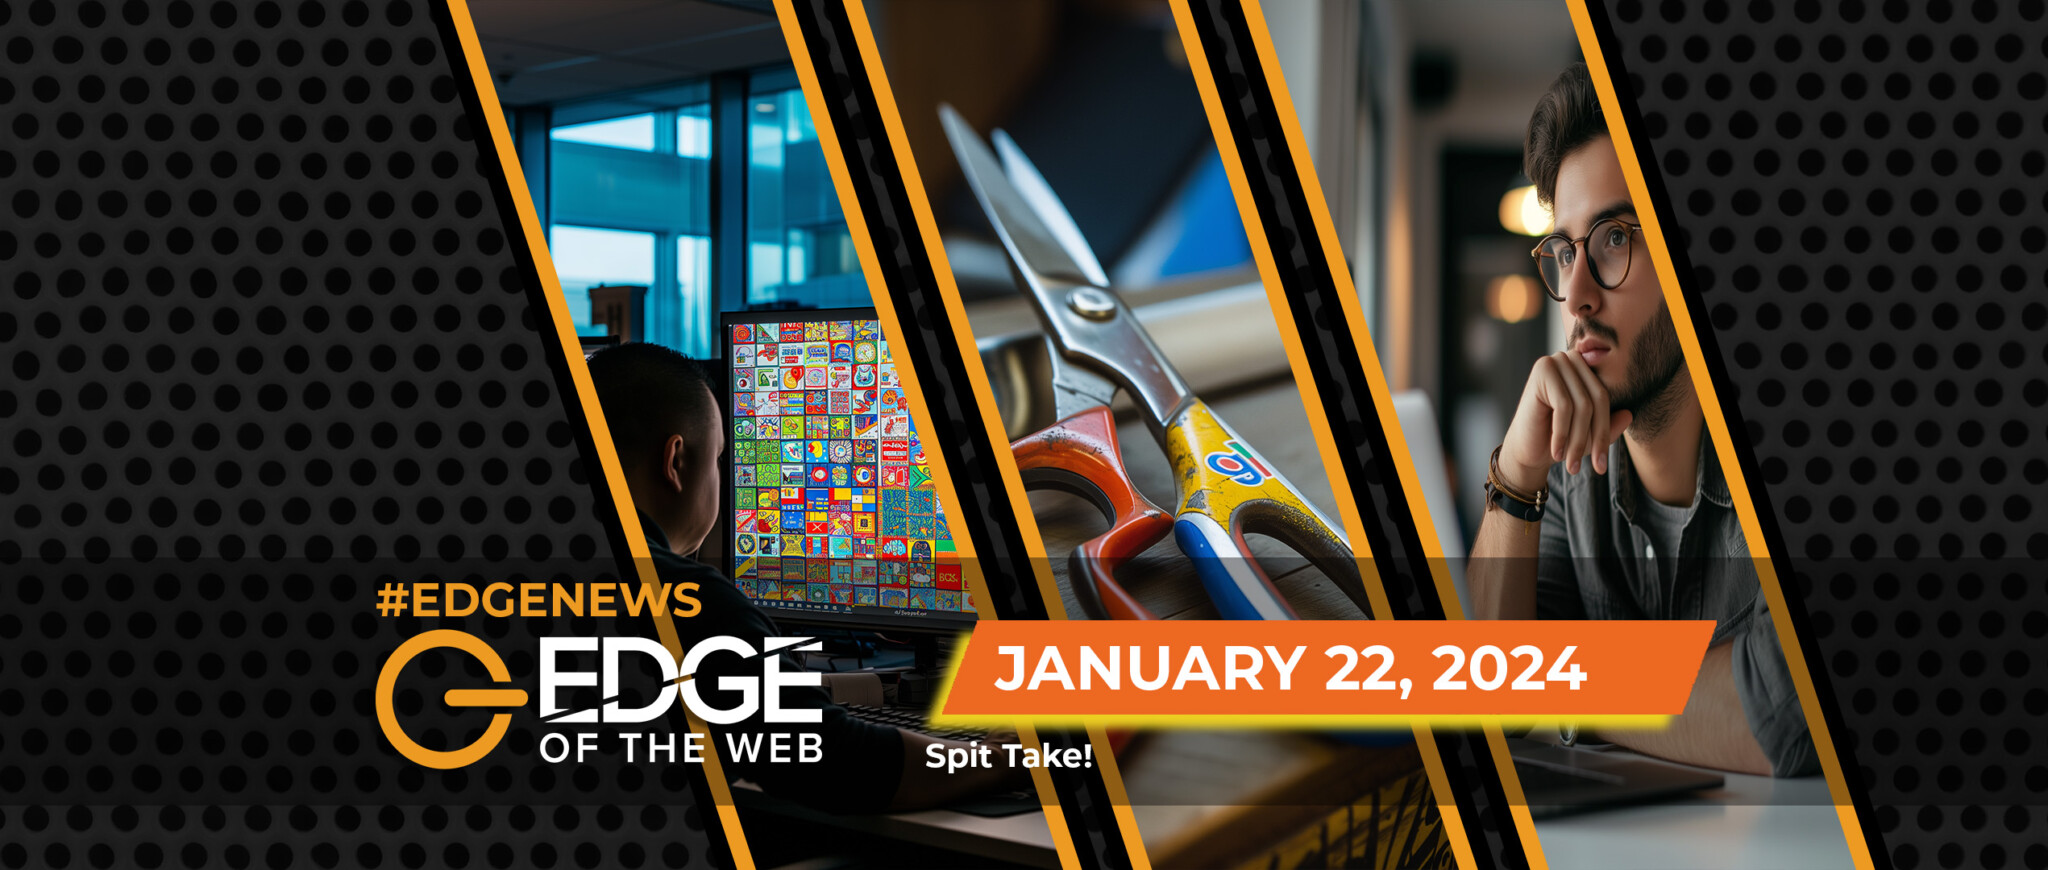 655 | News from the EDGE | Week of 1.22.2024